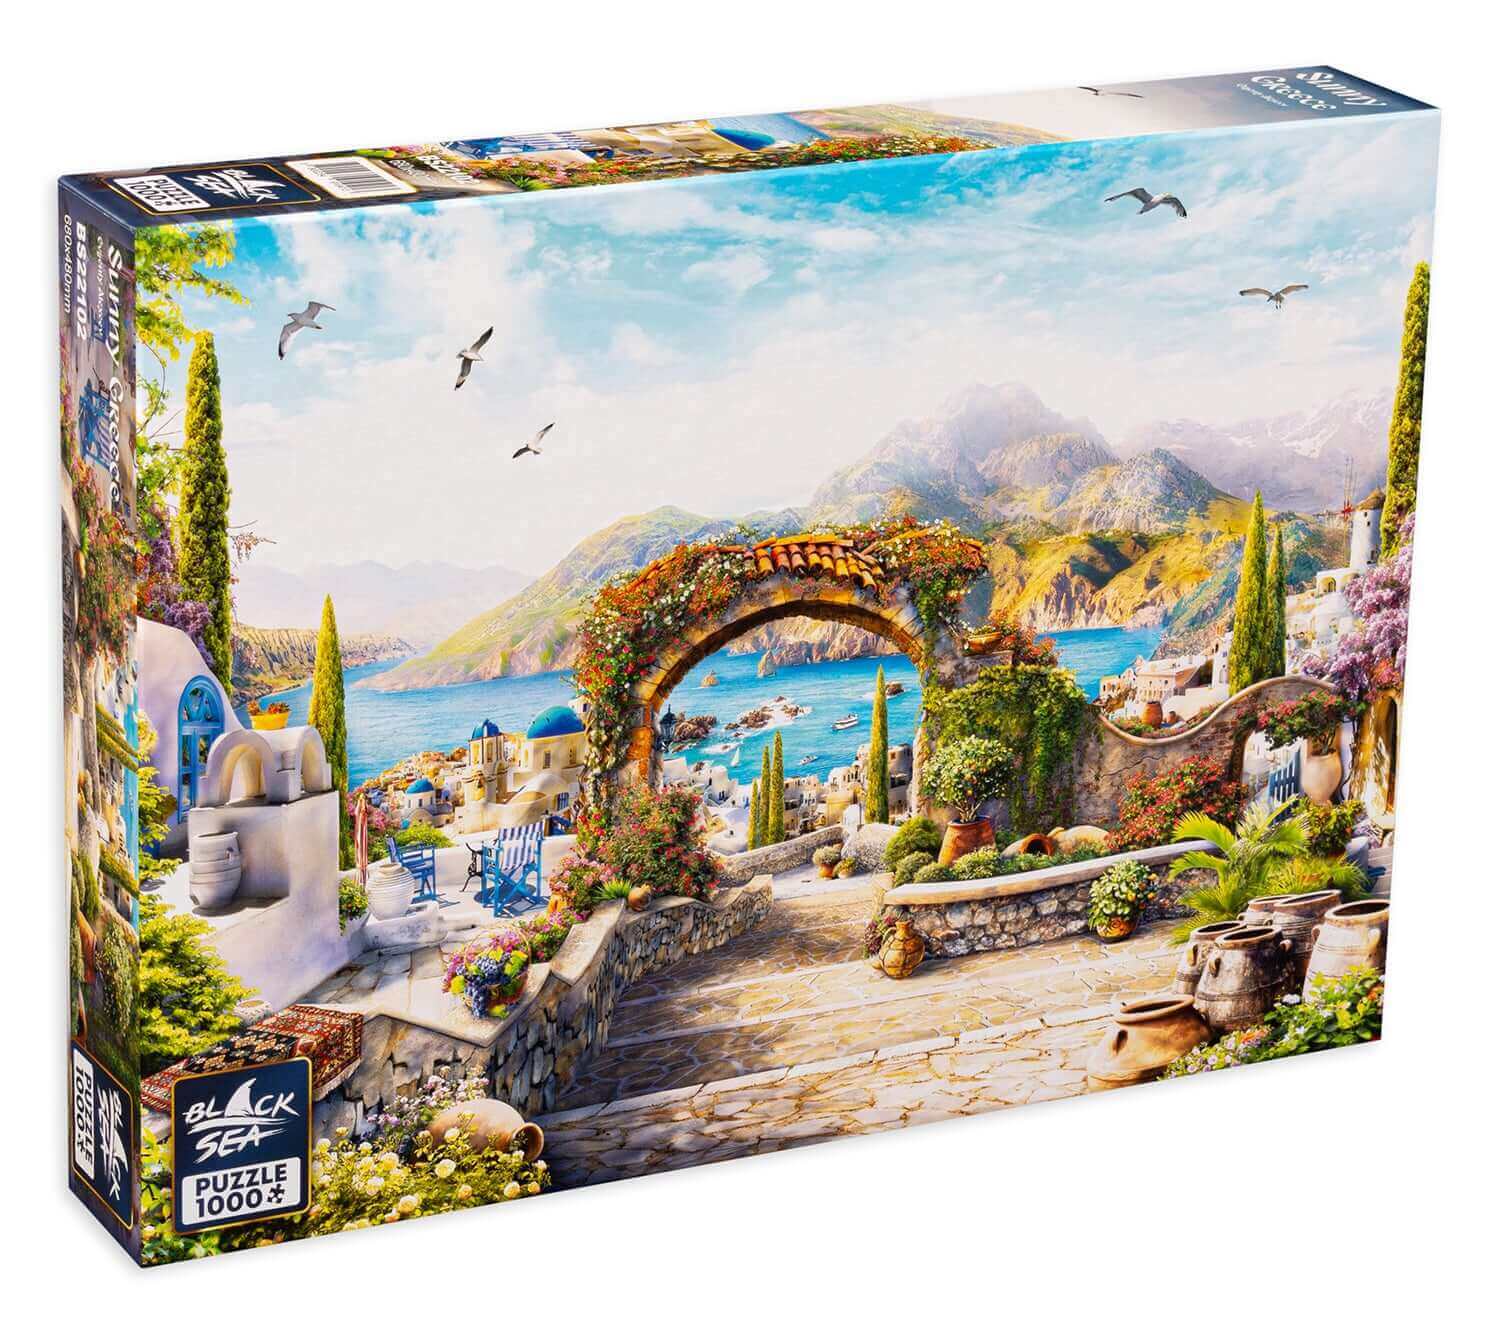 Puzzle Black Sea 1000 pieces - Sunny Greece, Go for a walk by the sea in the lush summer and let its soft, blue peace overwhelm you. Feel the caress of the rays of the sun slowly turning your skin into bronze. The soft rhythm of the waves is disturbed onl